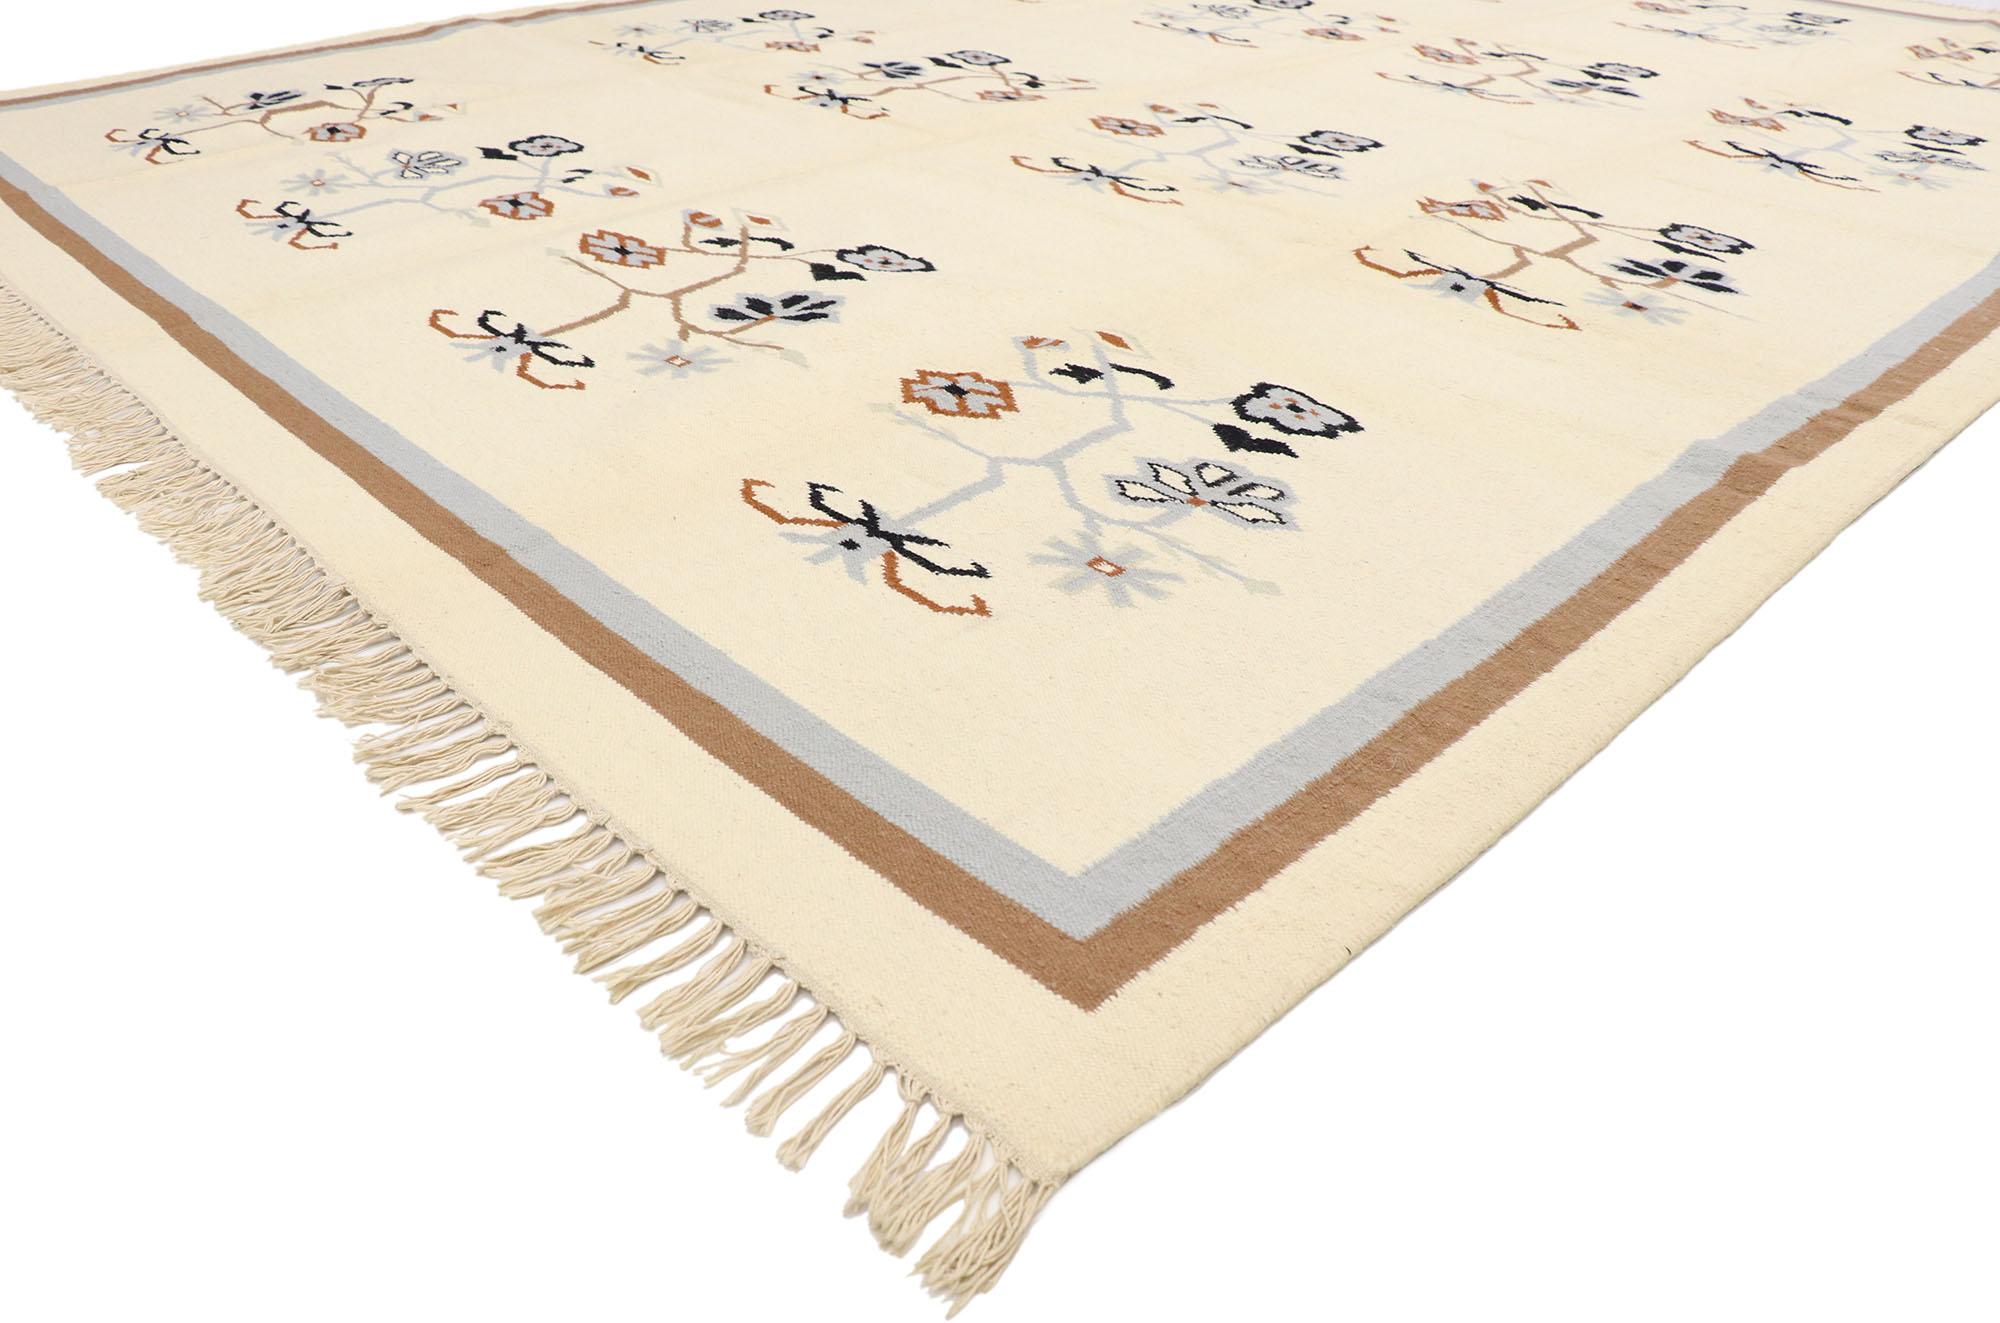 78057 vintage Chinese Floral Kilim rug with Modern style 08'08 x 11'08. Delicately feminine and beautifully traditional, this hand-woven wool vintage Chinese floral kilim rug is poised to impress. The abrashed beige field features an all-over floral